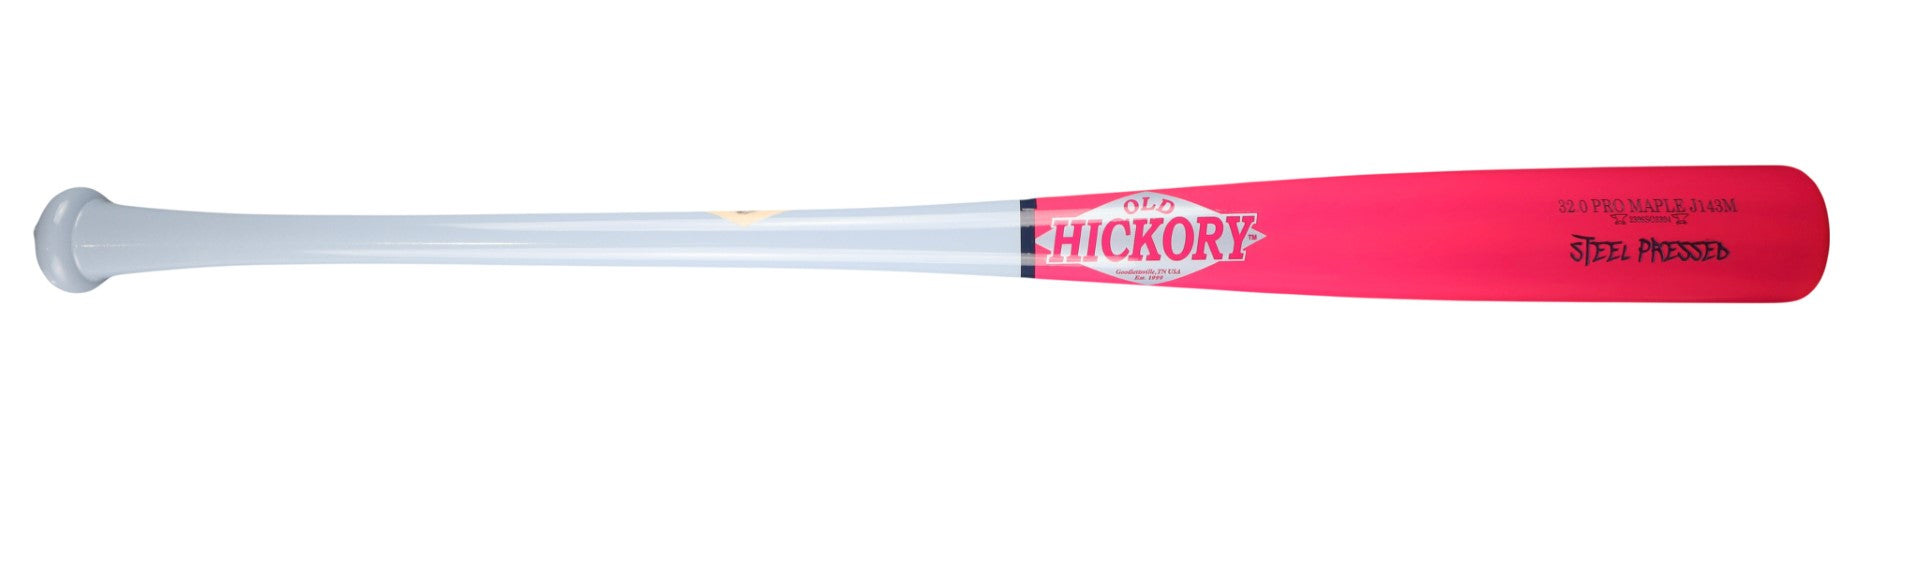 Old Hickory J143M Cotton Candy Steel Pressed